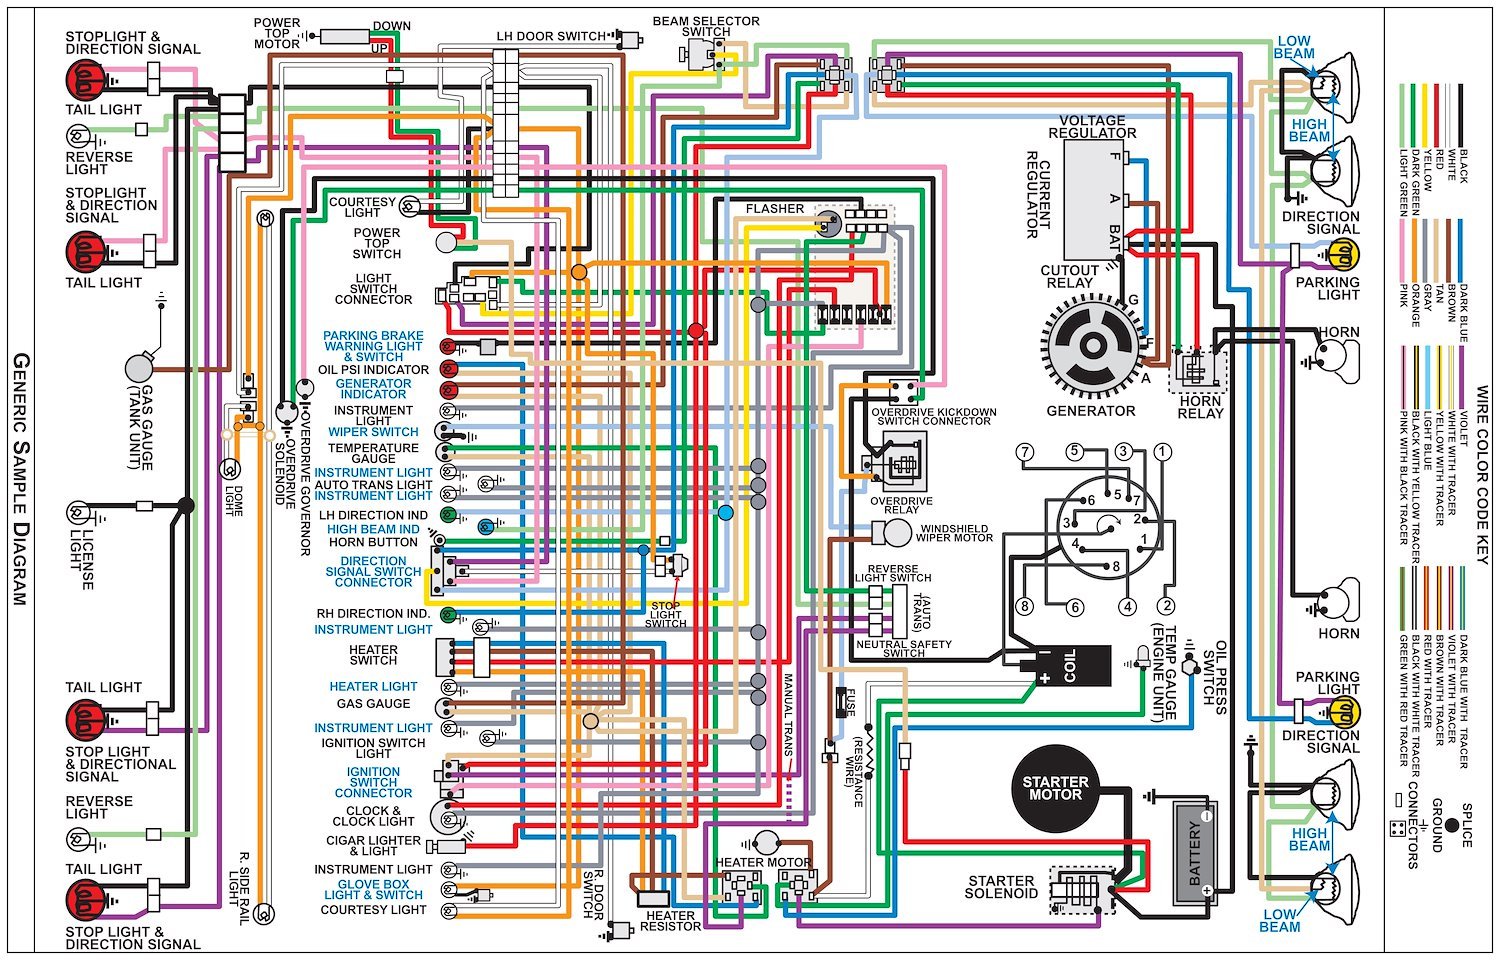 Wiring Diagram for 1967 Ford P-Series Truck, 11 in x 17 in., Laminated